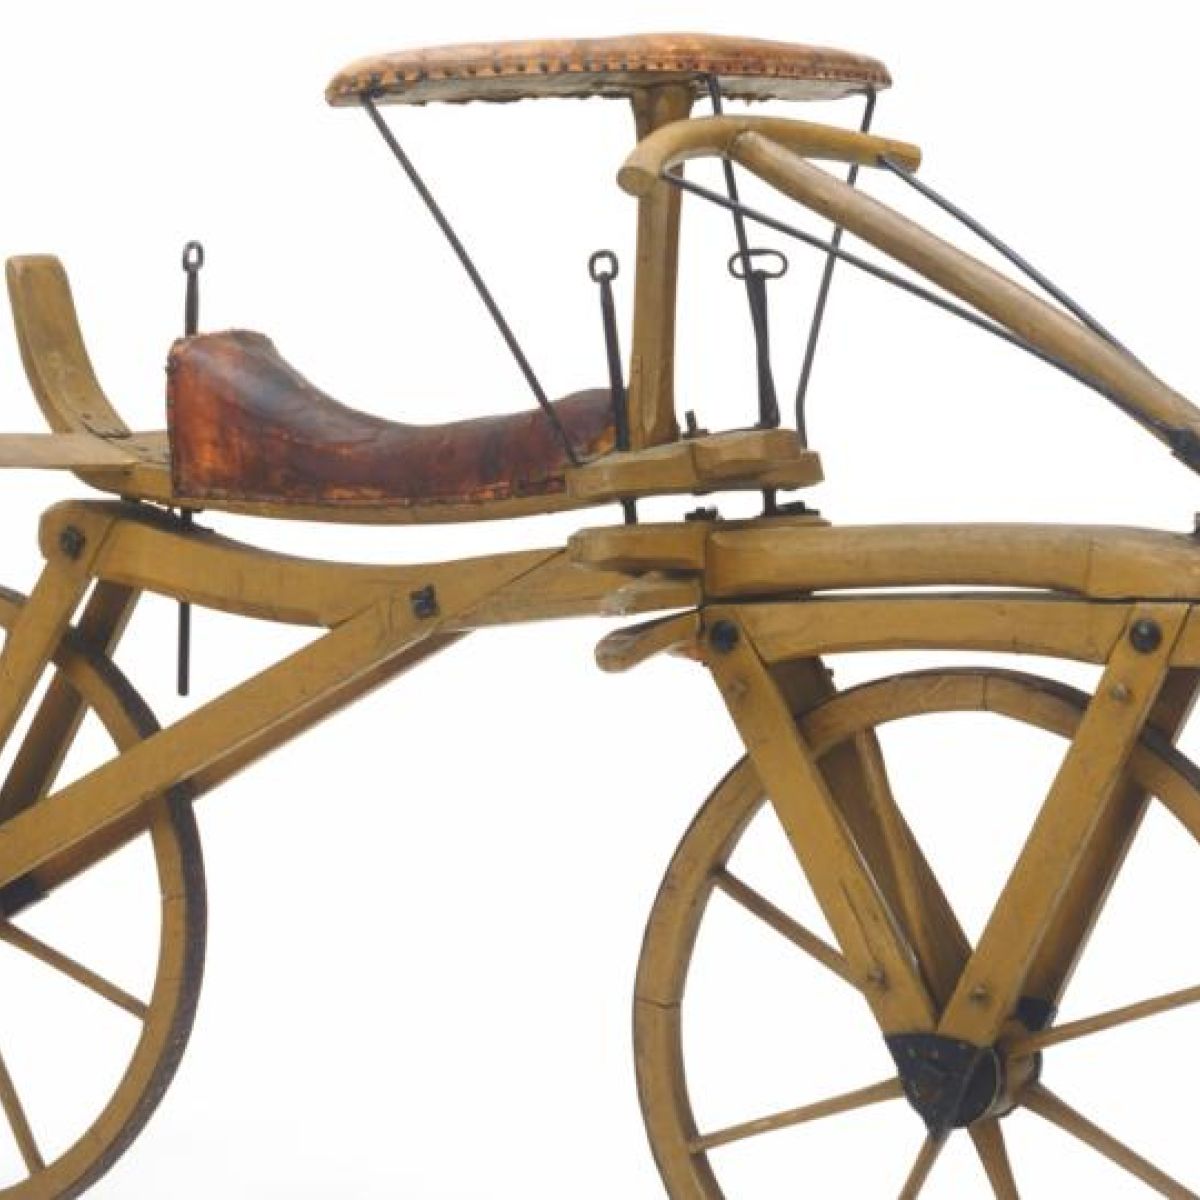 first bicycle inventor